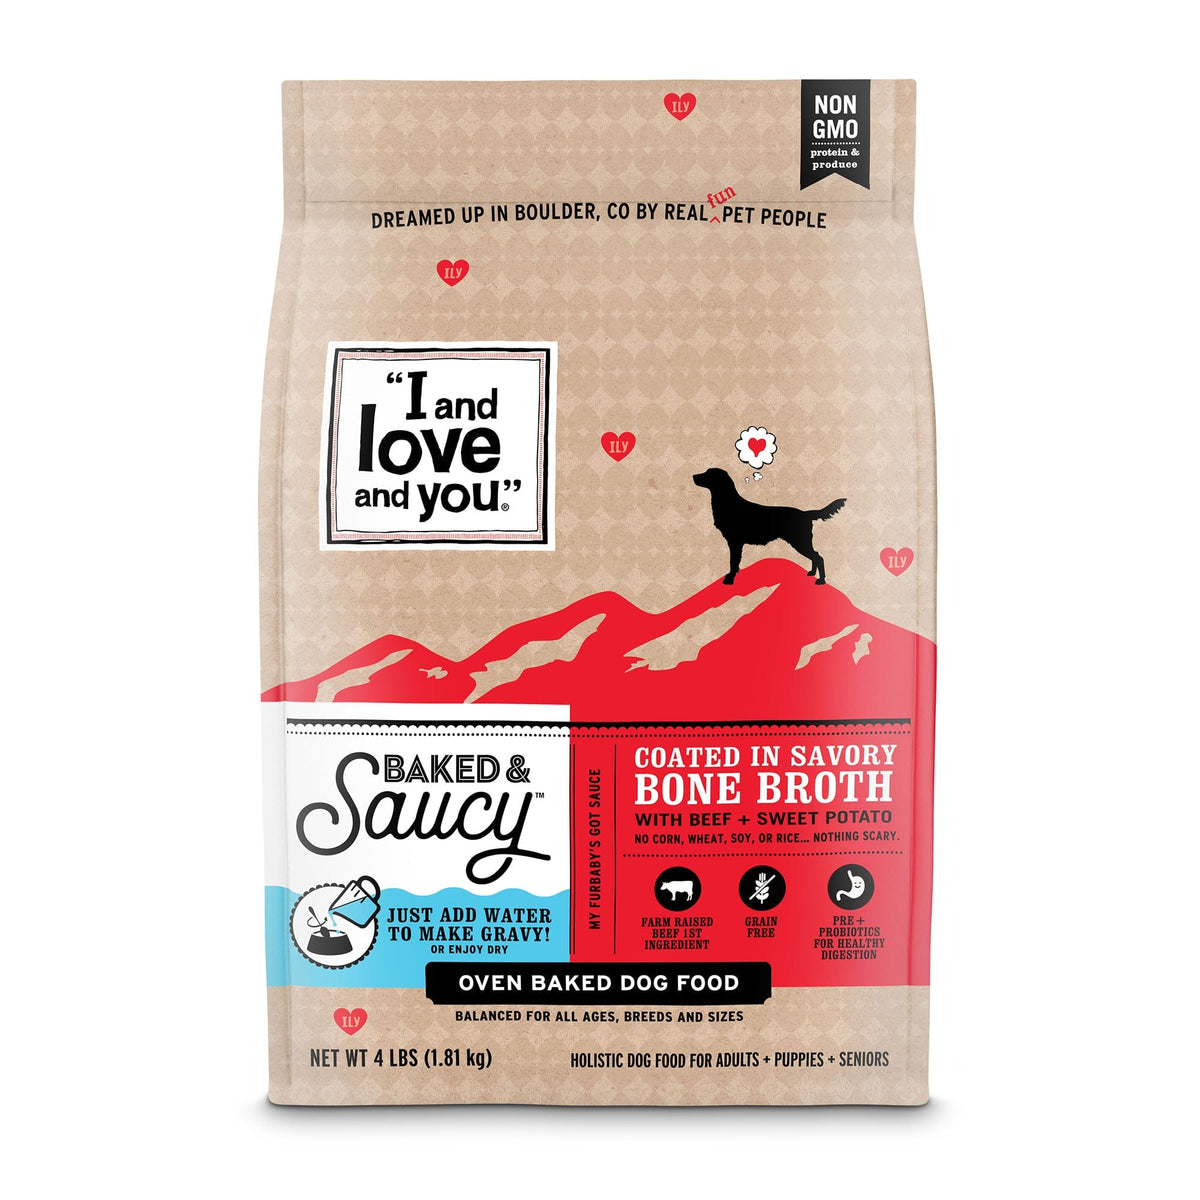 Baked & Saucy - Beef + Sweet Potato. Heart-shaped kibble coated in savory bone broth with beef and sweet potato, a bag of dog food with a silhouette of a dog.